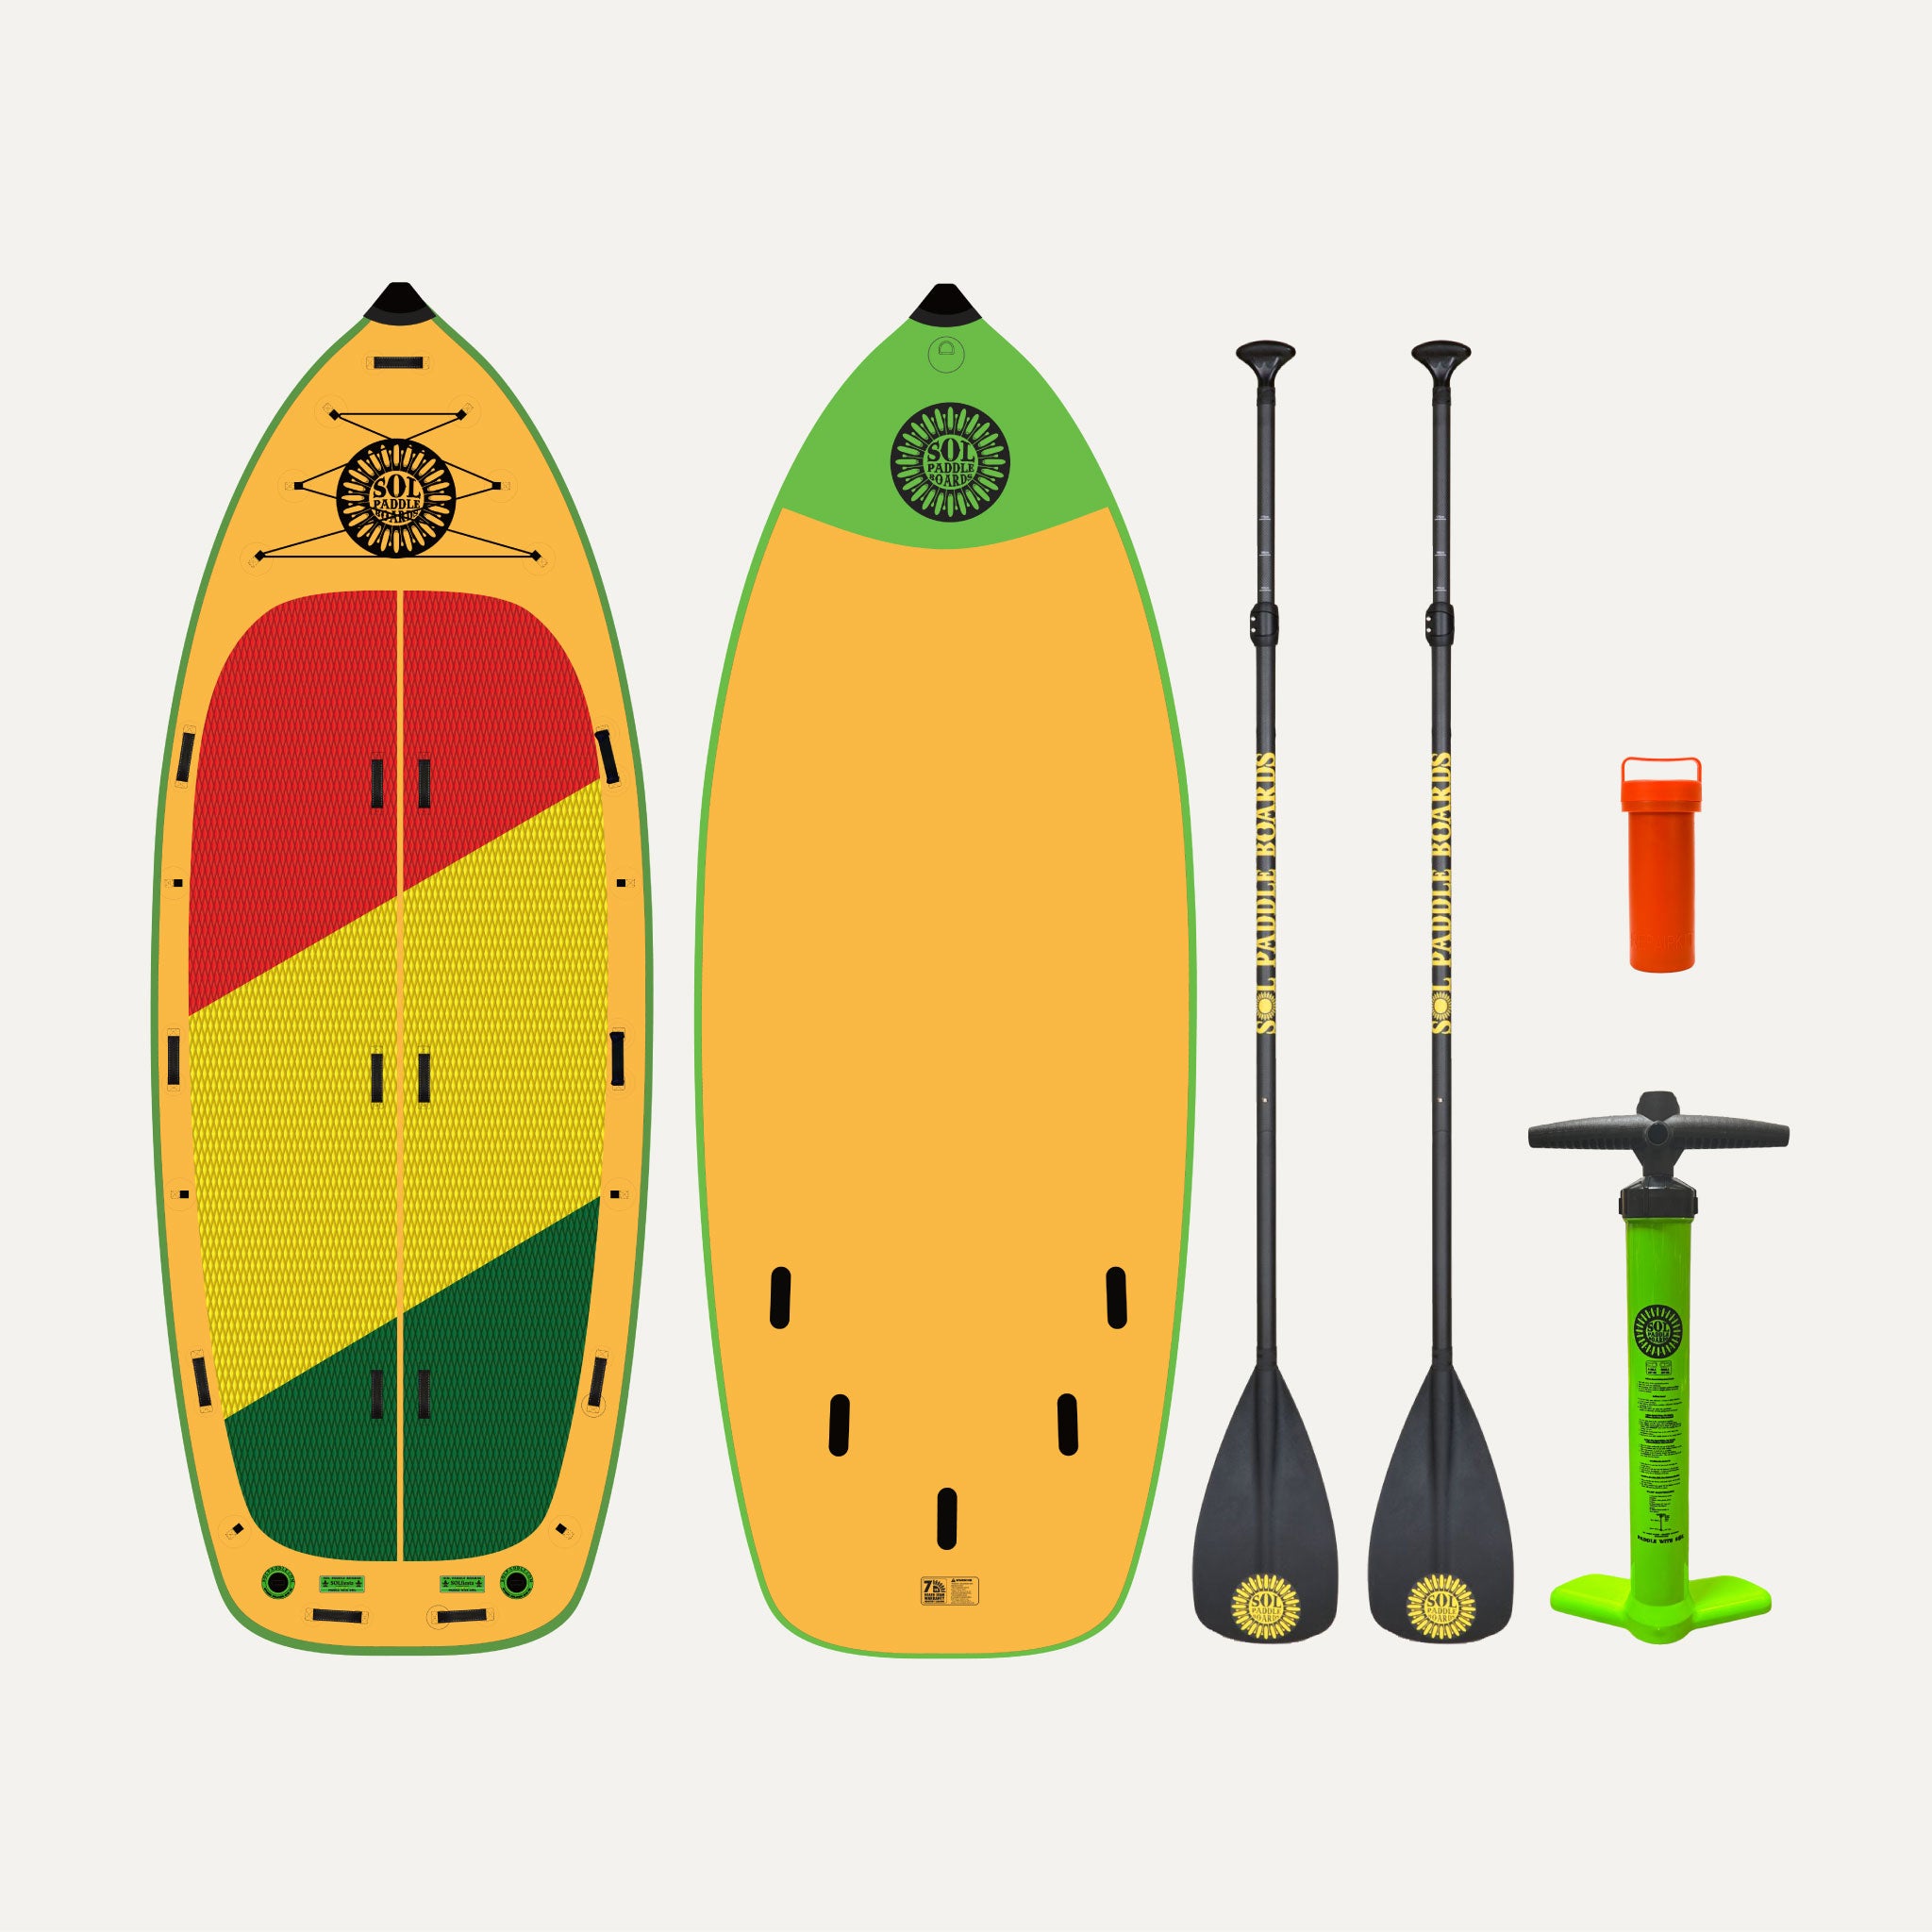 Classic SOLfiesta Inflatable Paddle Board showcasing the top and bottom views of the SUP board and the accessories that come with it